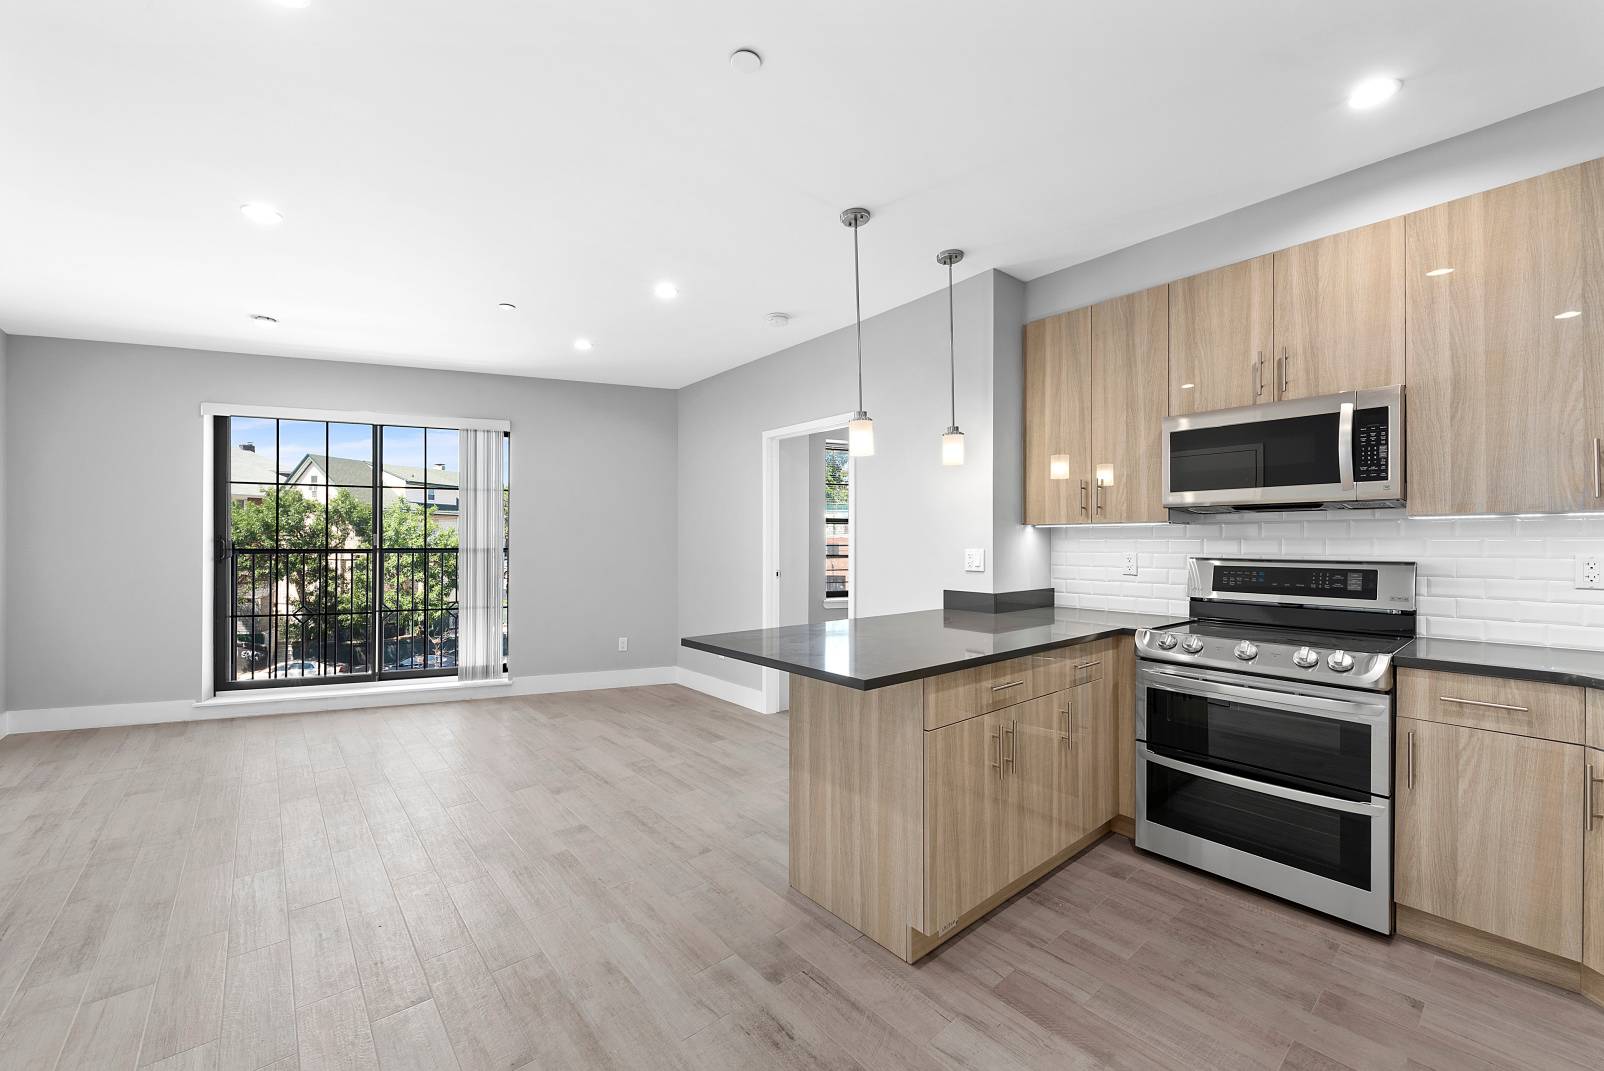 The outstanding, luxury new rental building located in East Elmhurst Close to Flushing, Jackson Heights and Astoria which are culturally rich regions offering some of the best cuisine, entertainment, and ...